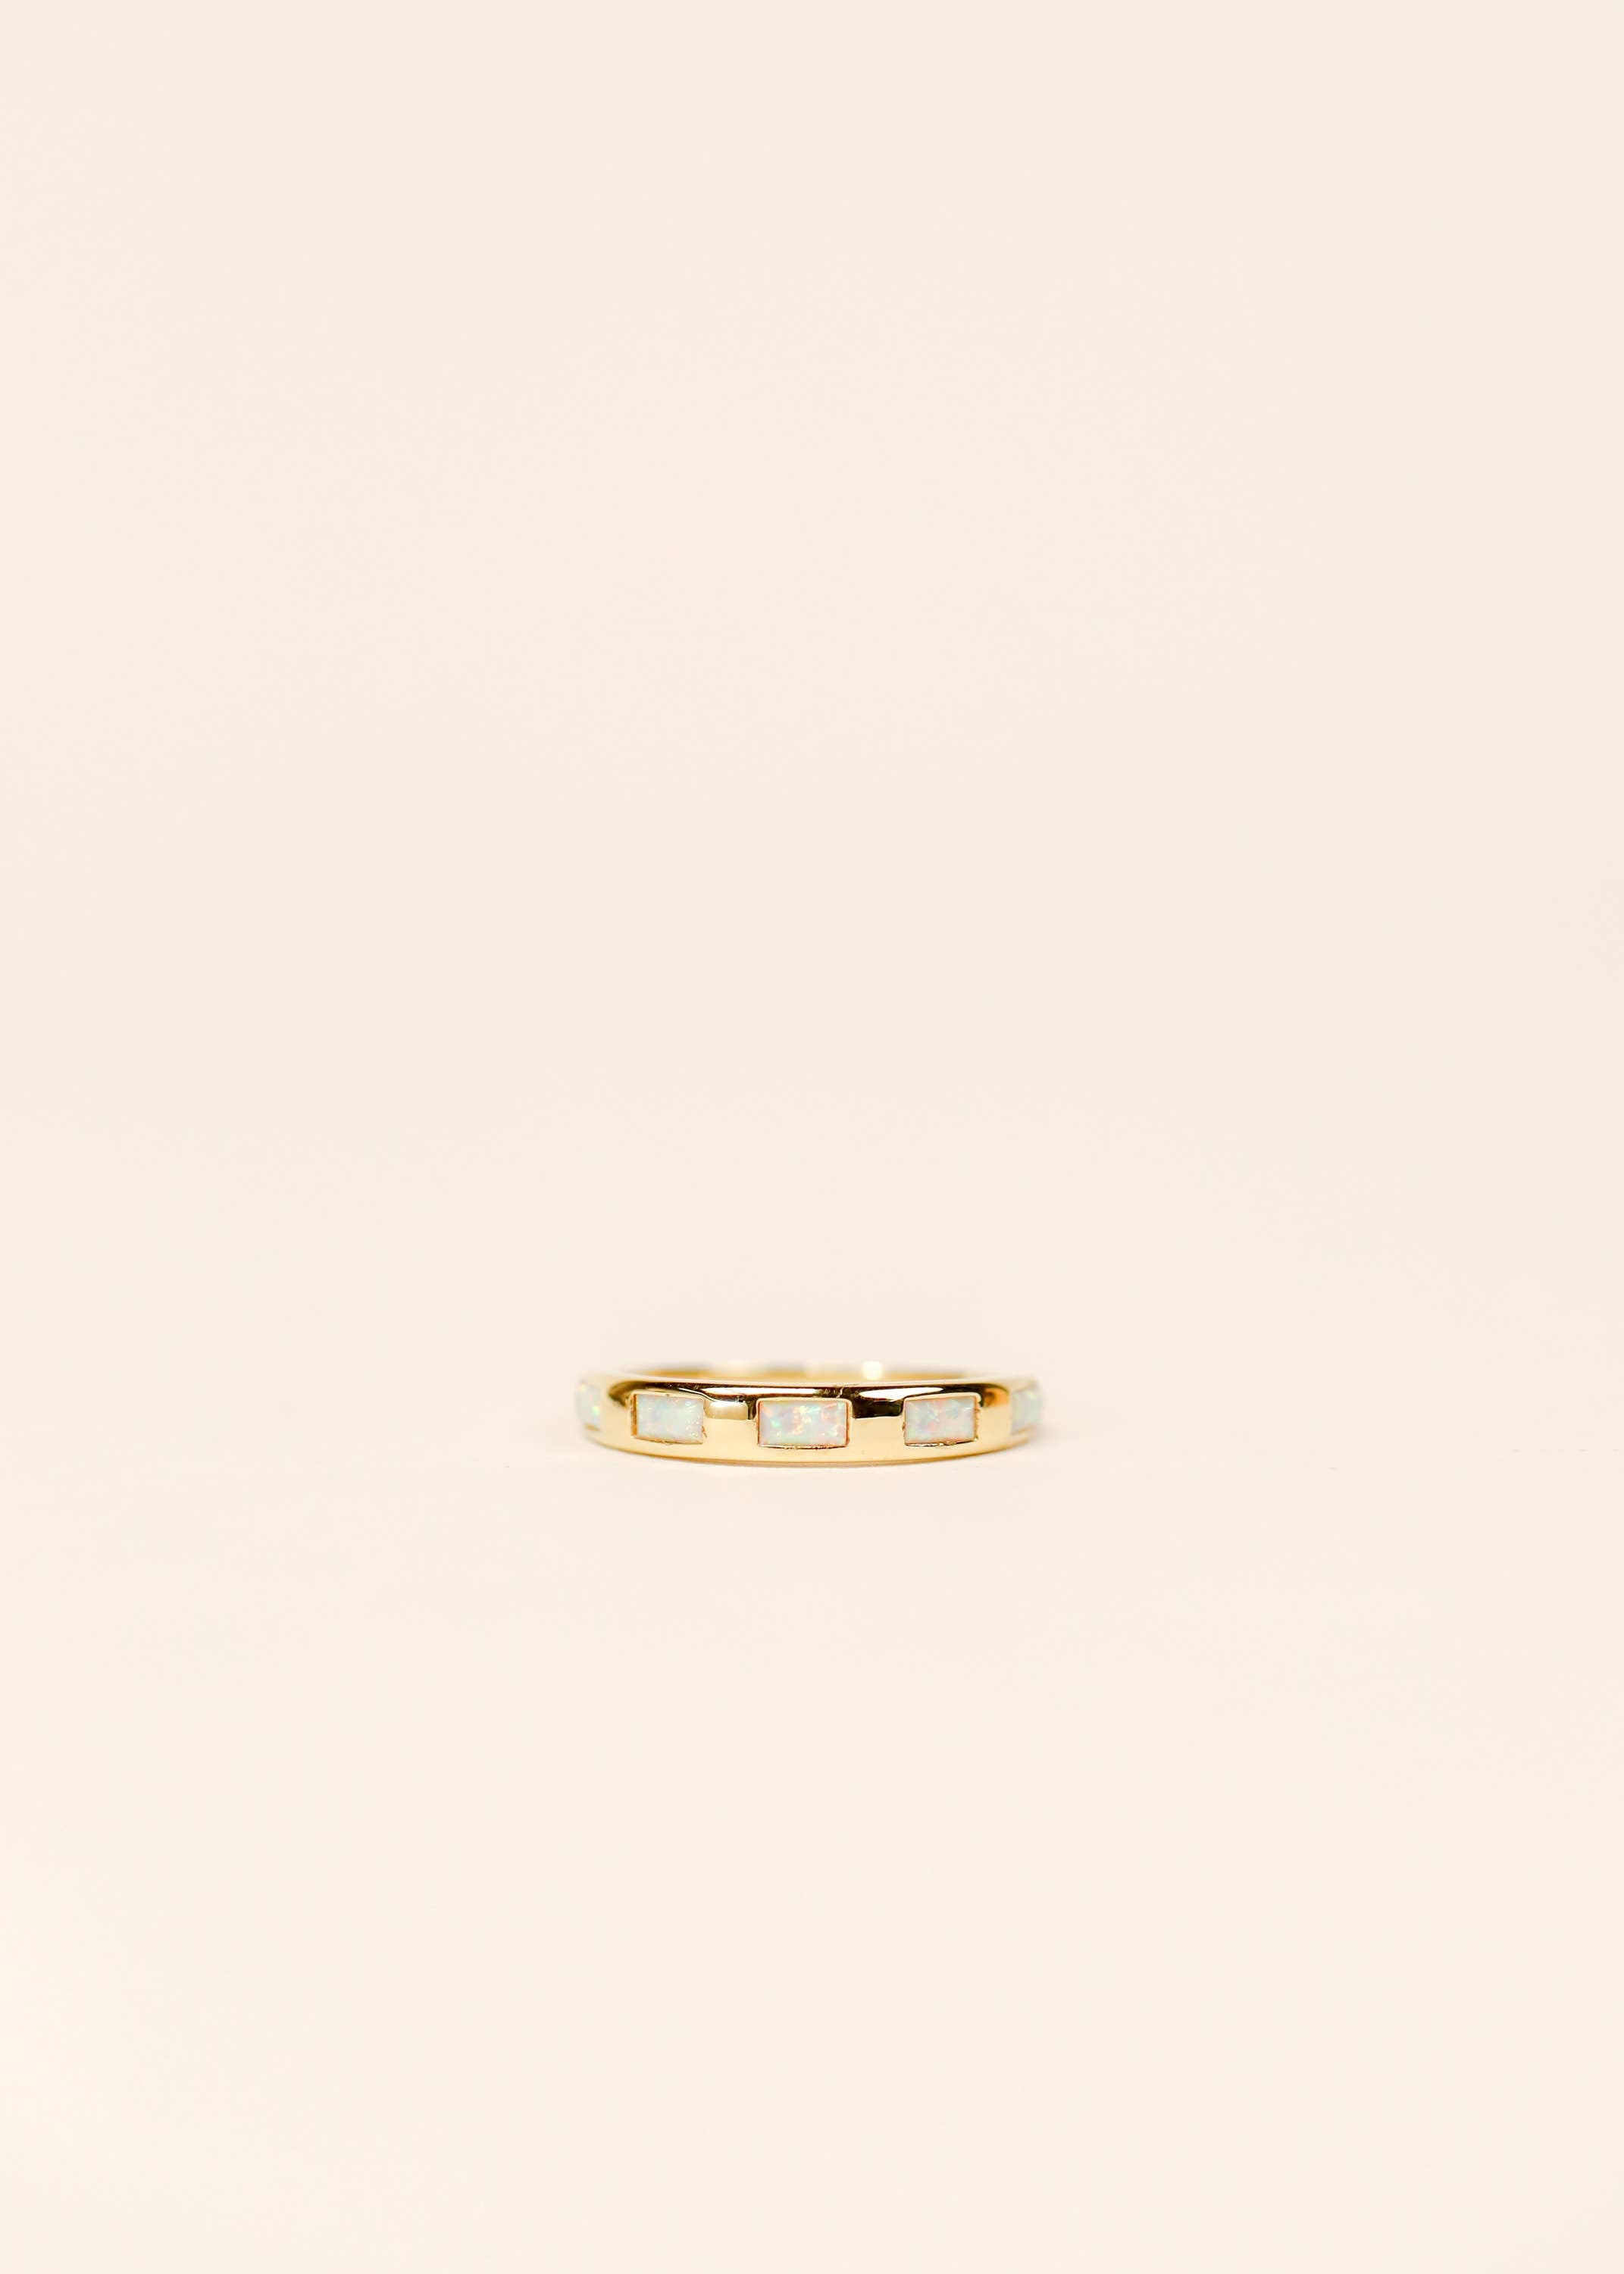 JaxKelly - Ring -  White Opal Inset Baguette